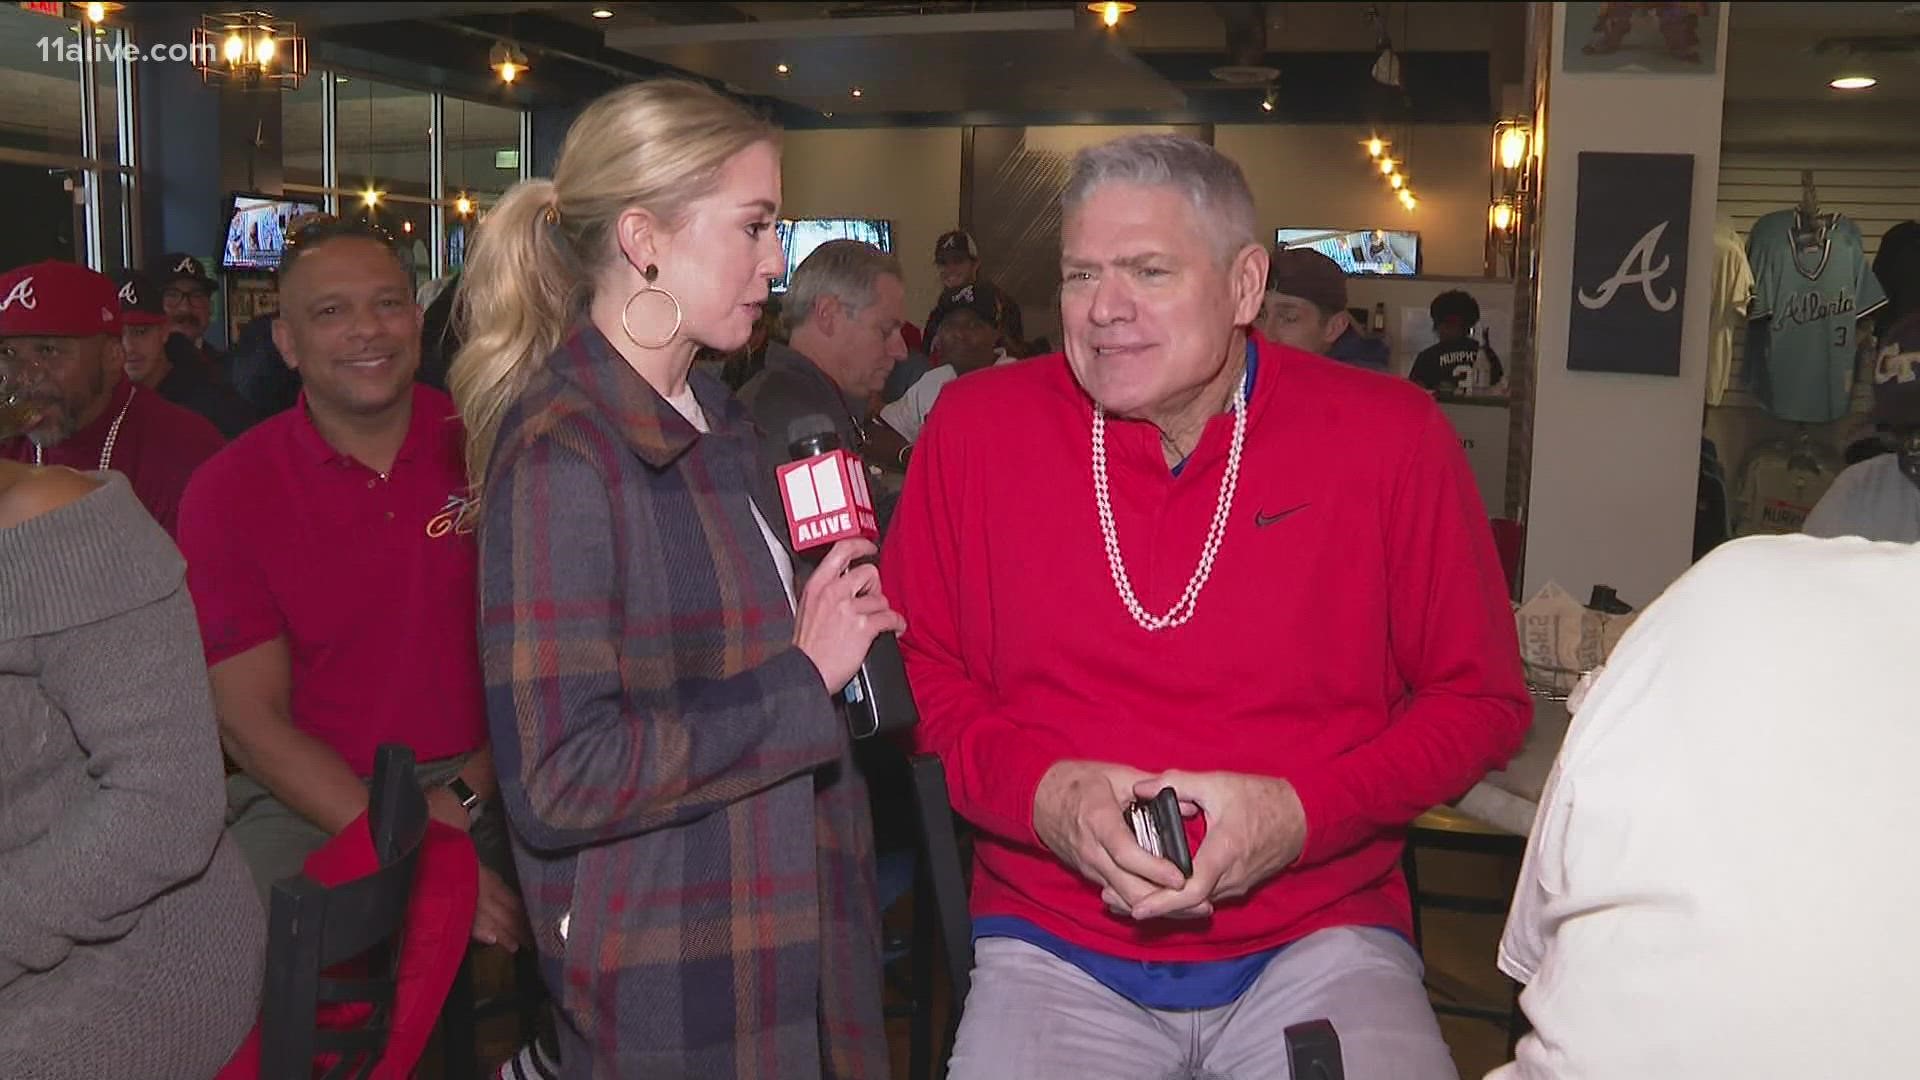 Braves legend Dale Murphy excited about World Series